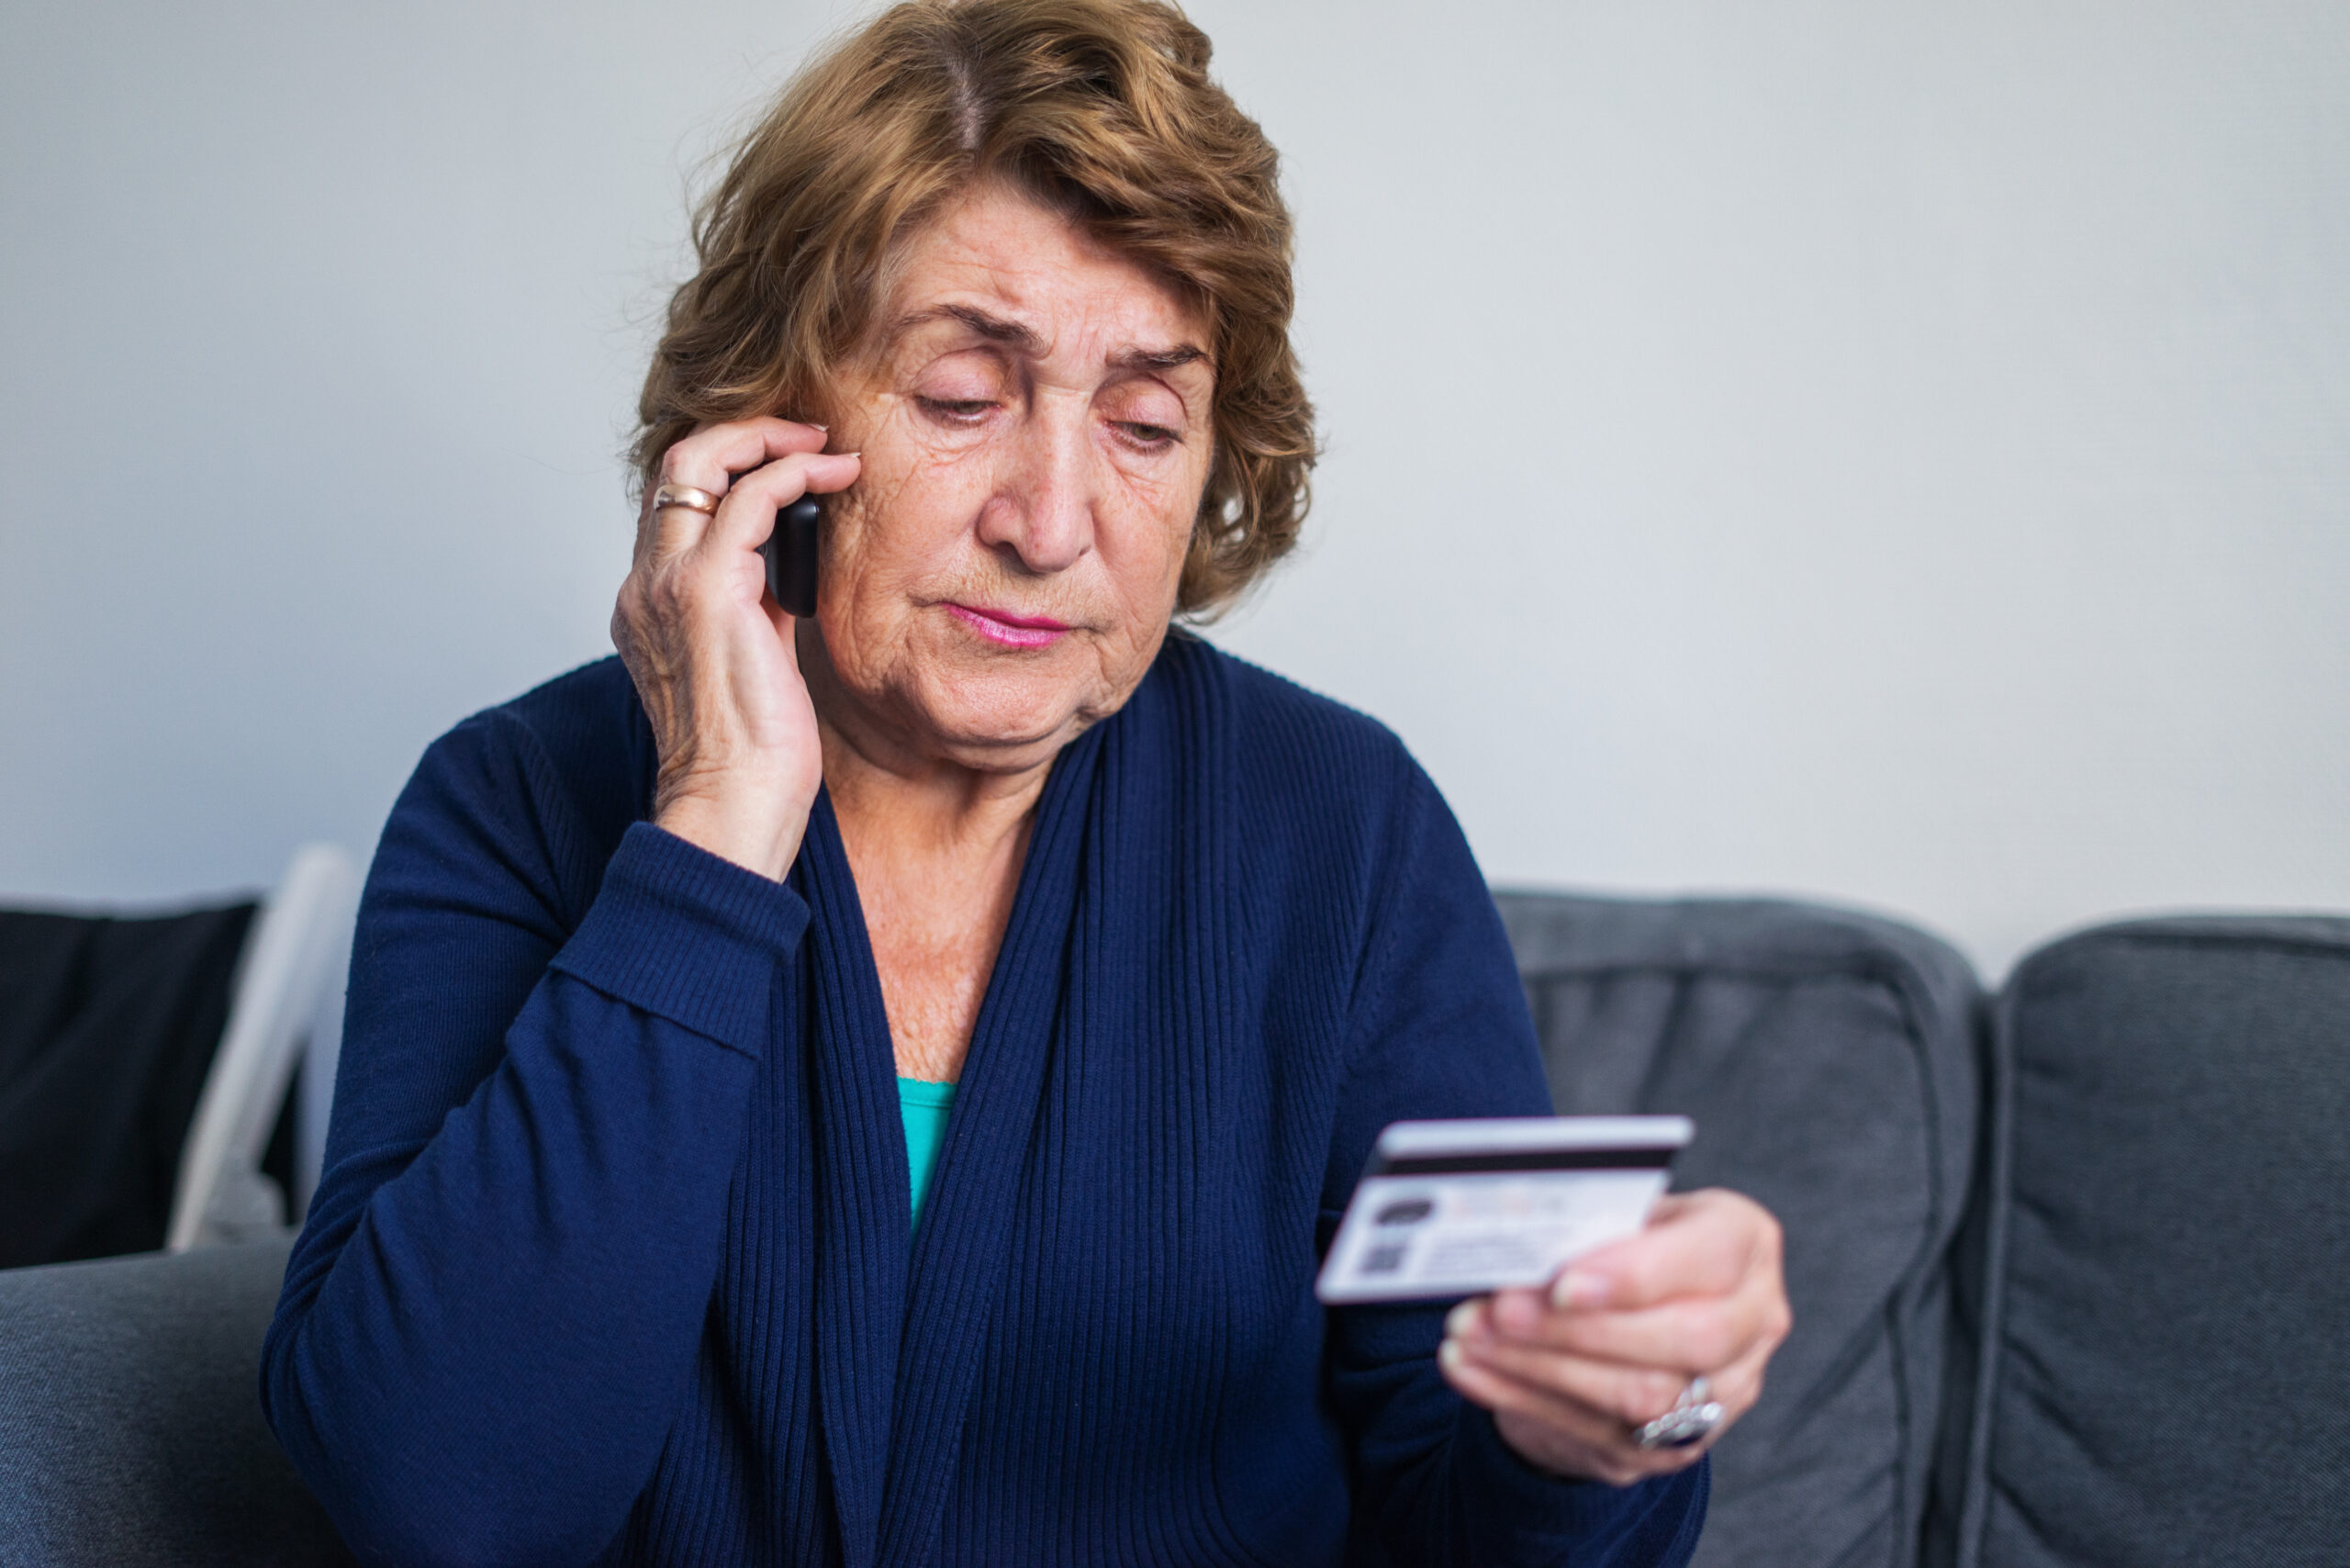 senior woman on the phone looking at credit card